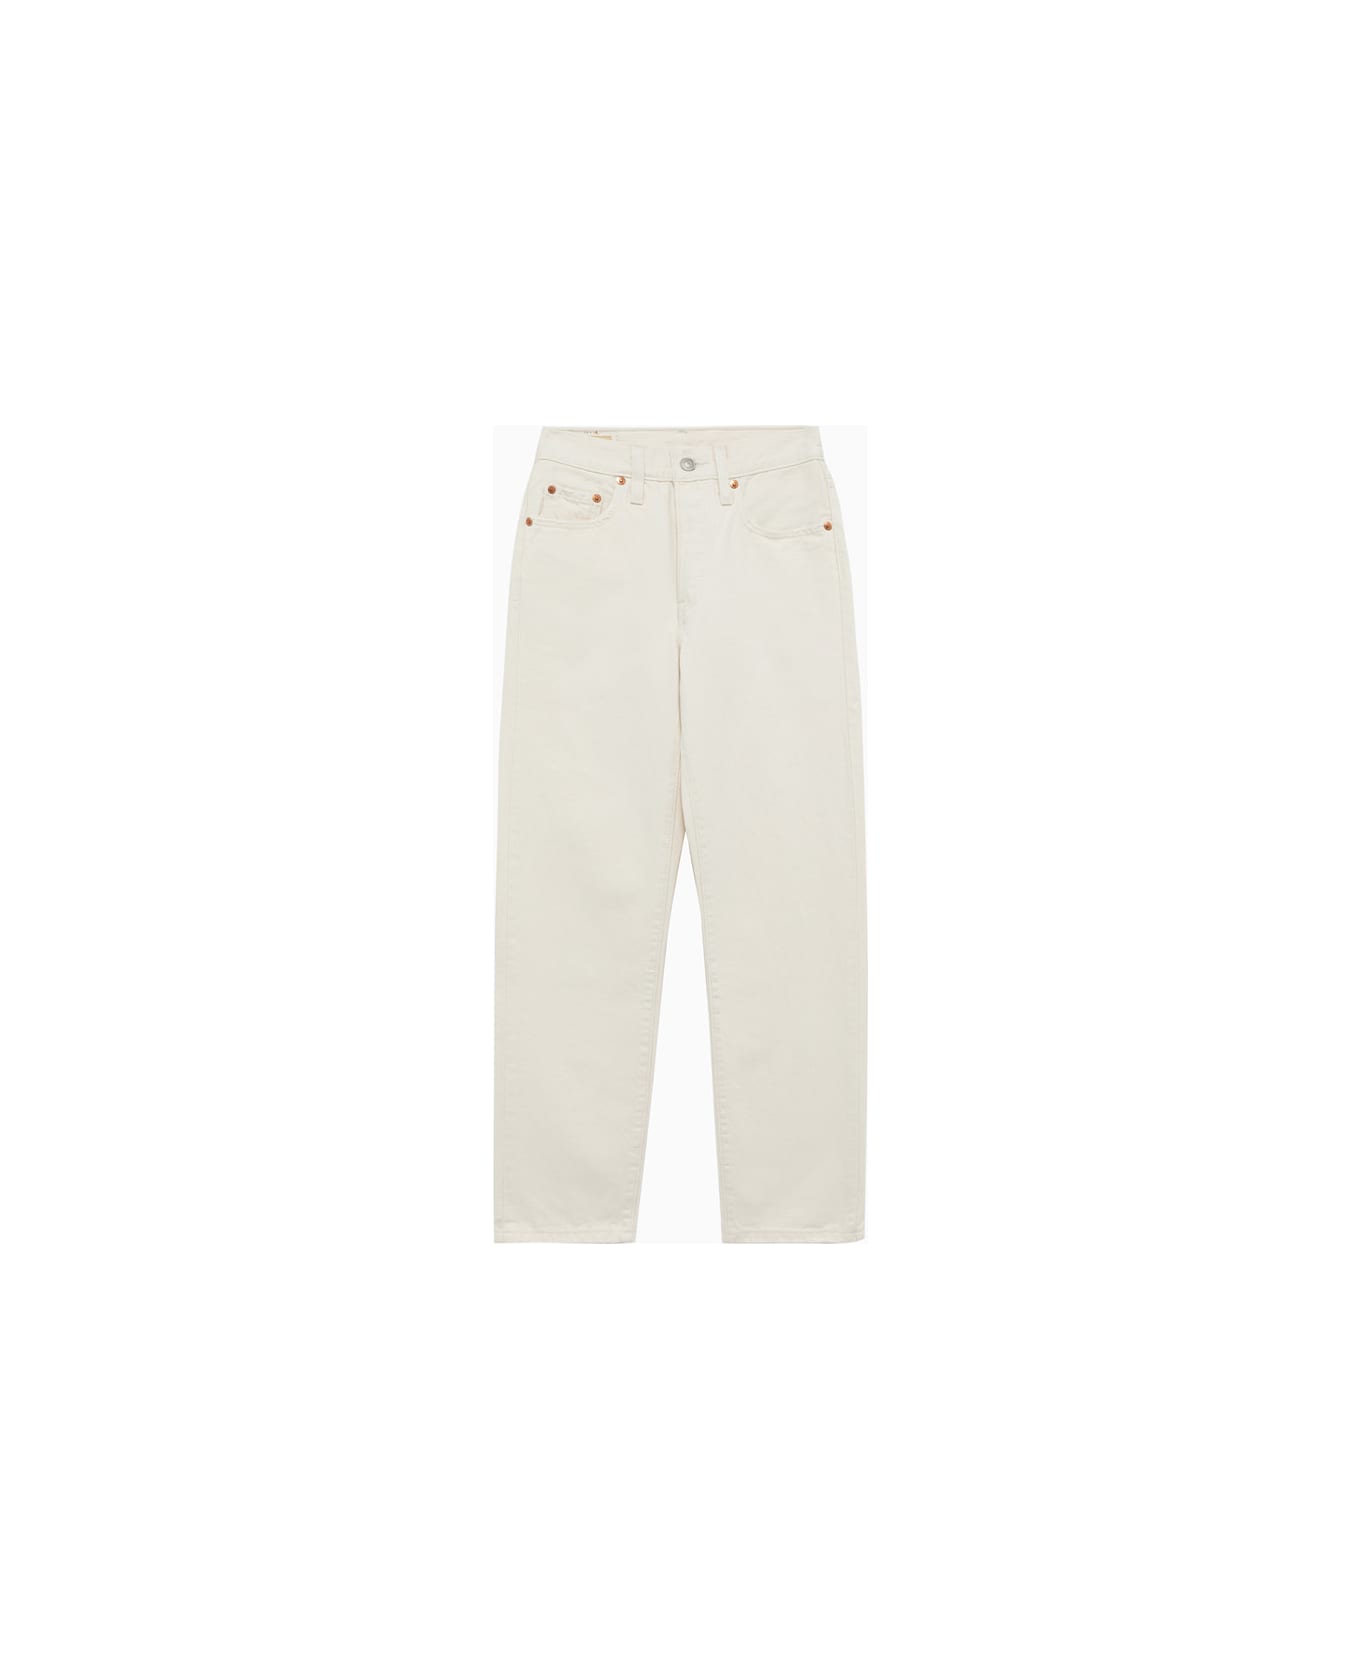 Levi's Levis 501 Cropped Jeans - White ボトムス